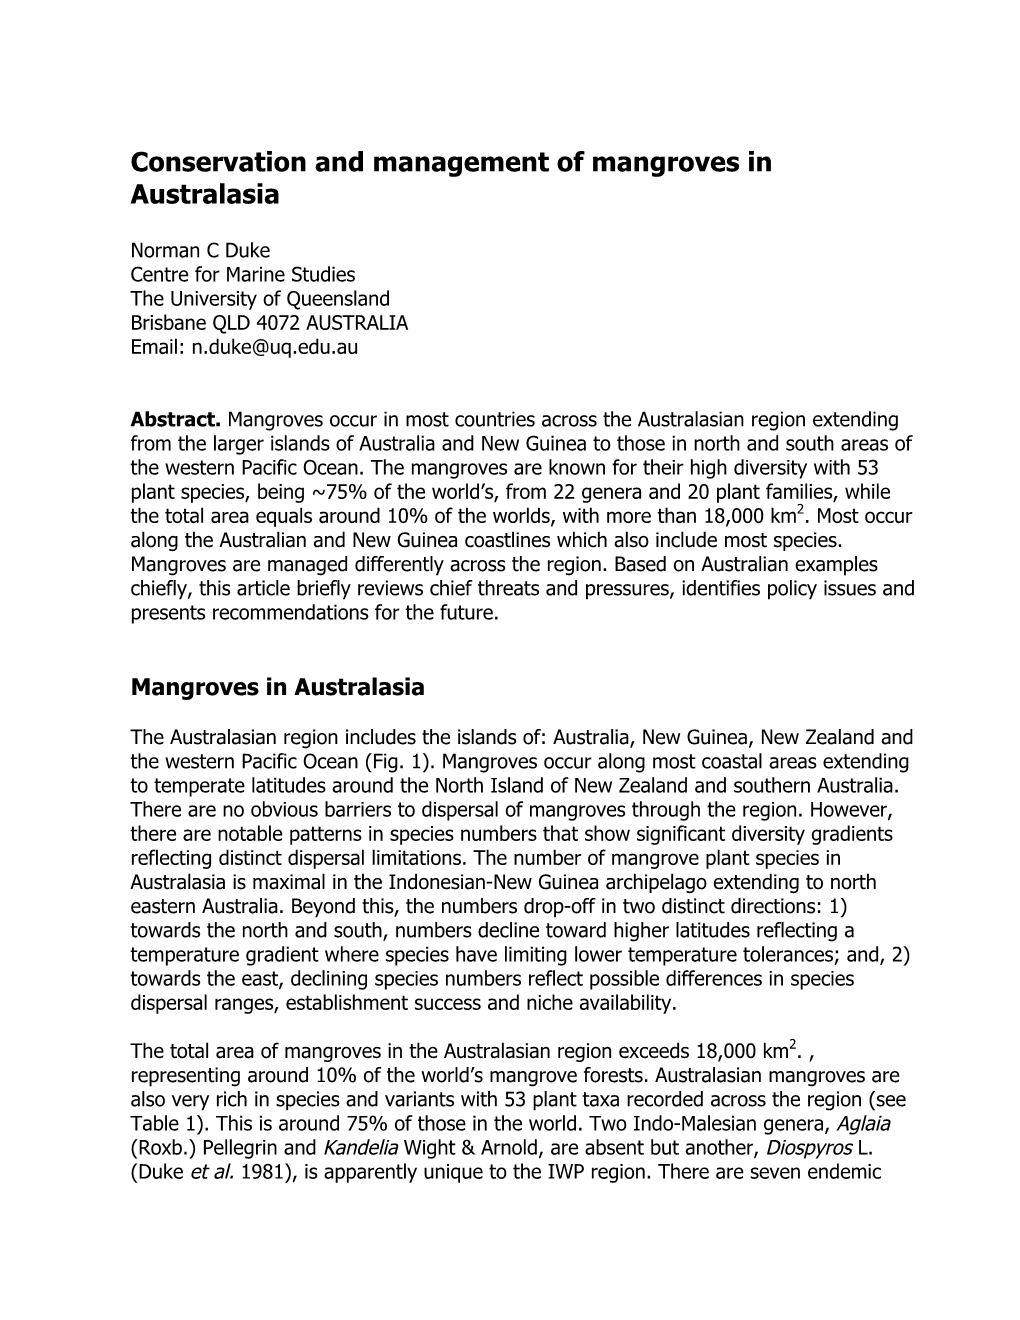 Conservation and Management of Mangroves in Australasia